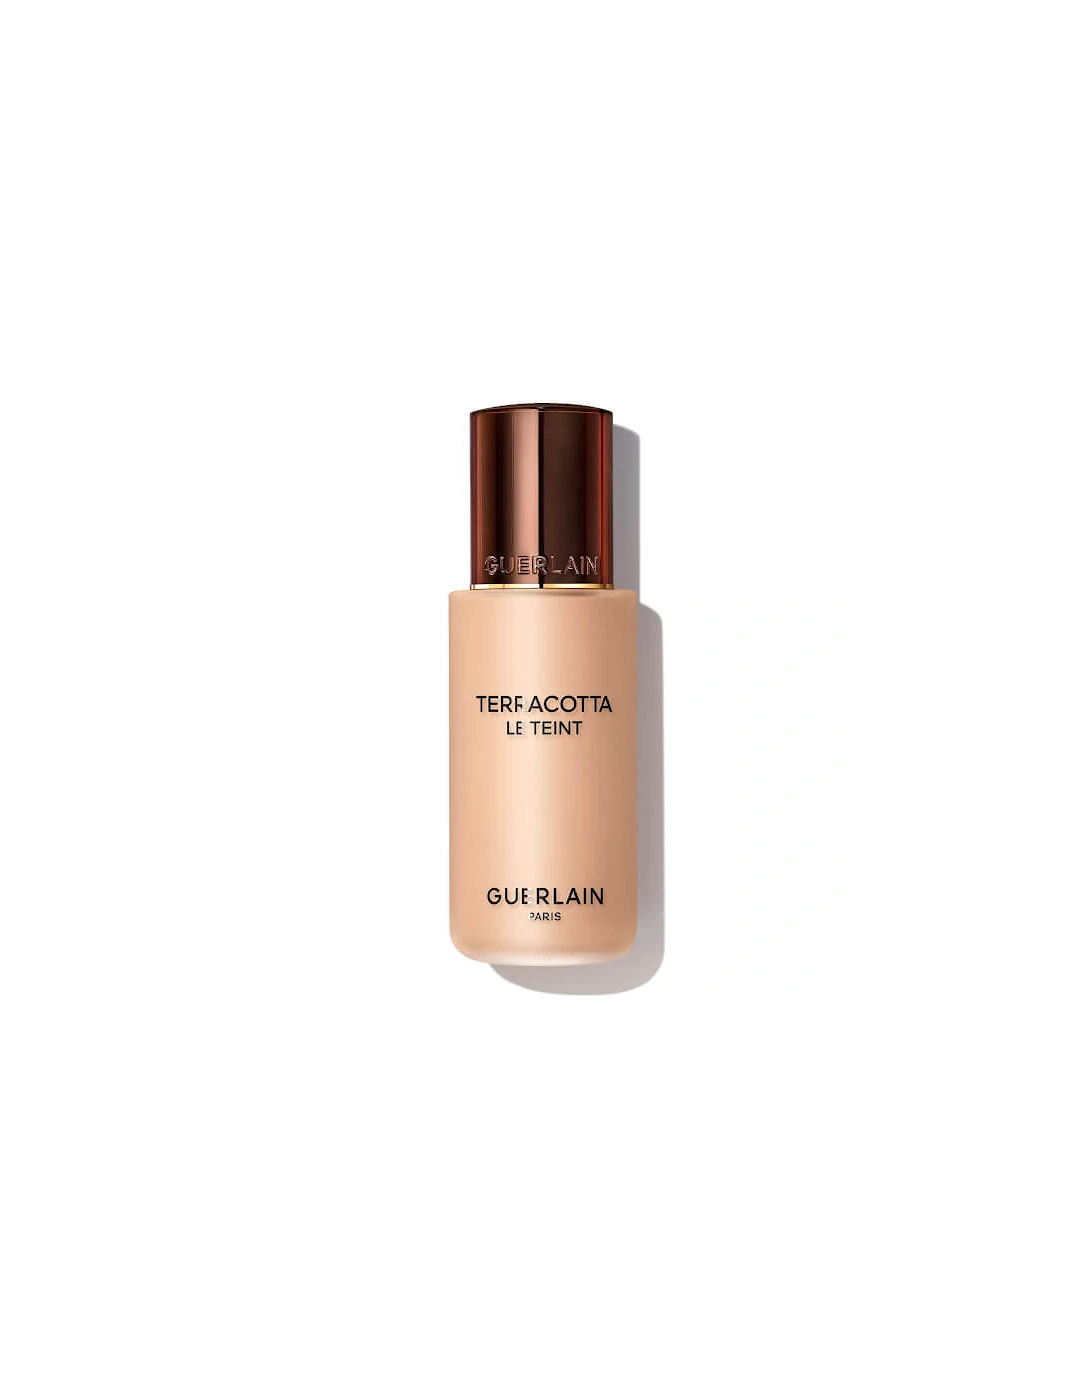 Terracotta Le Teint Healthy Glow Natural Perfection Foundation - 3N, 2 of 1